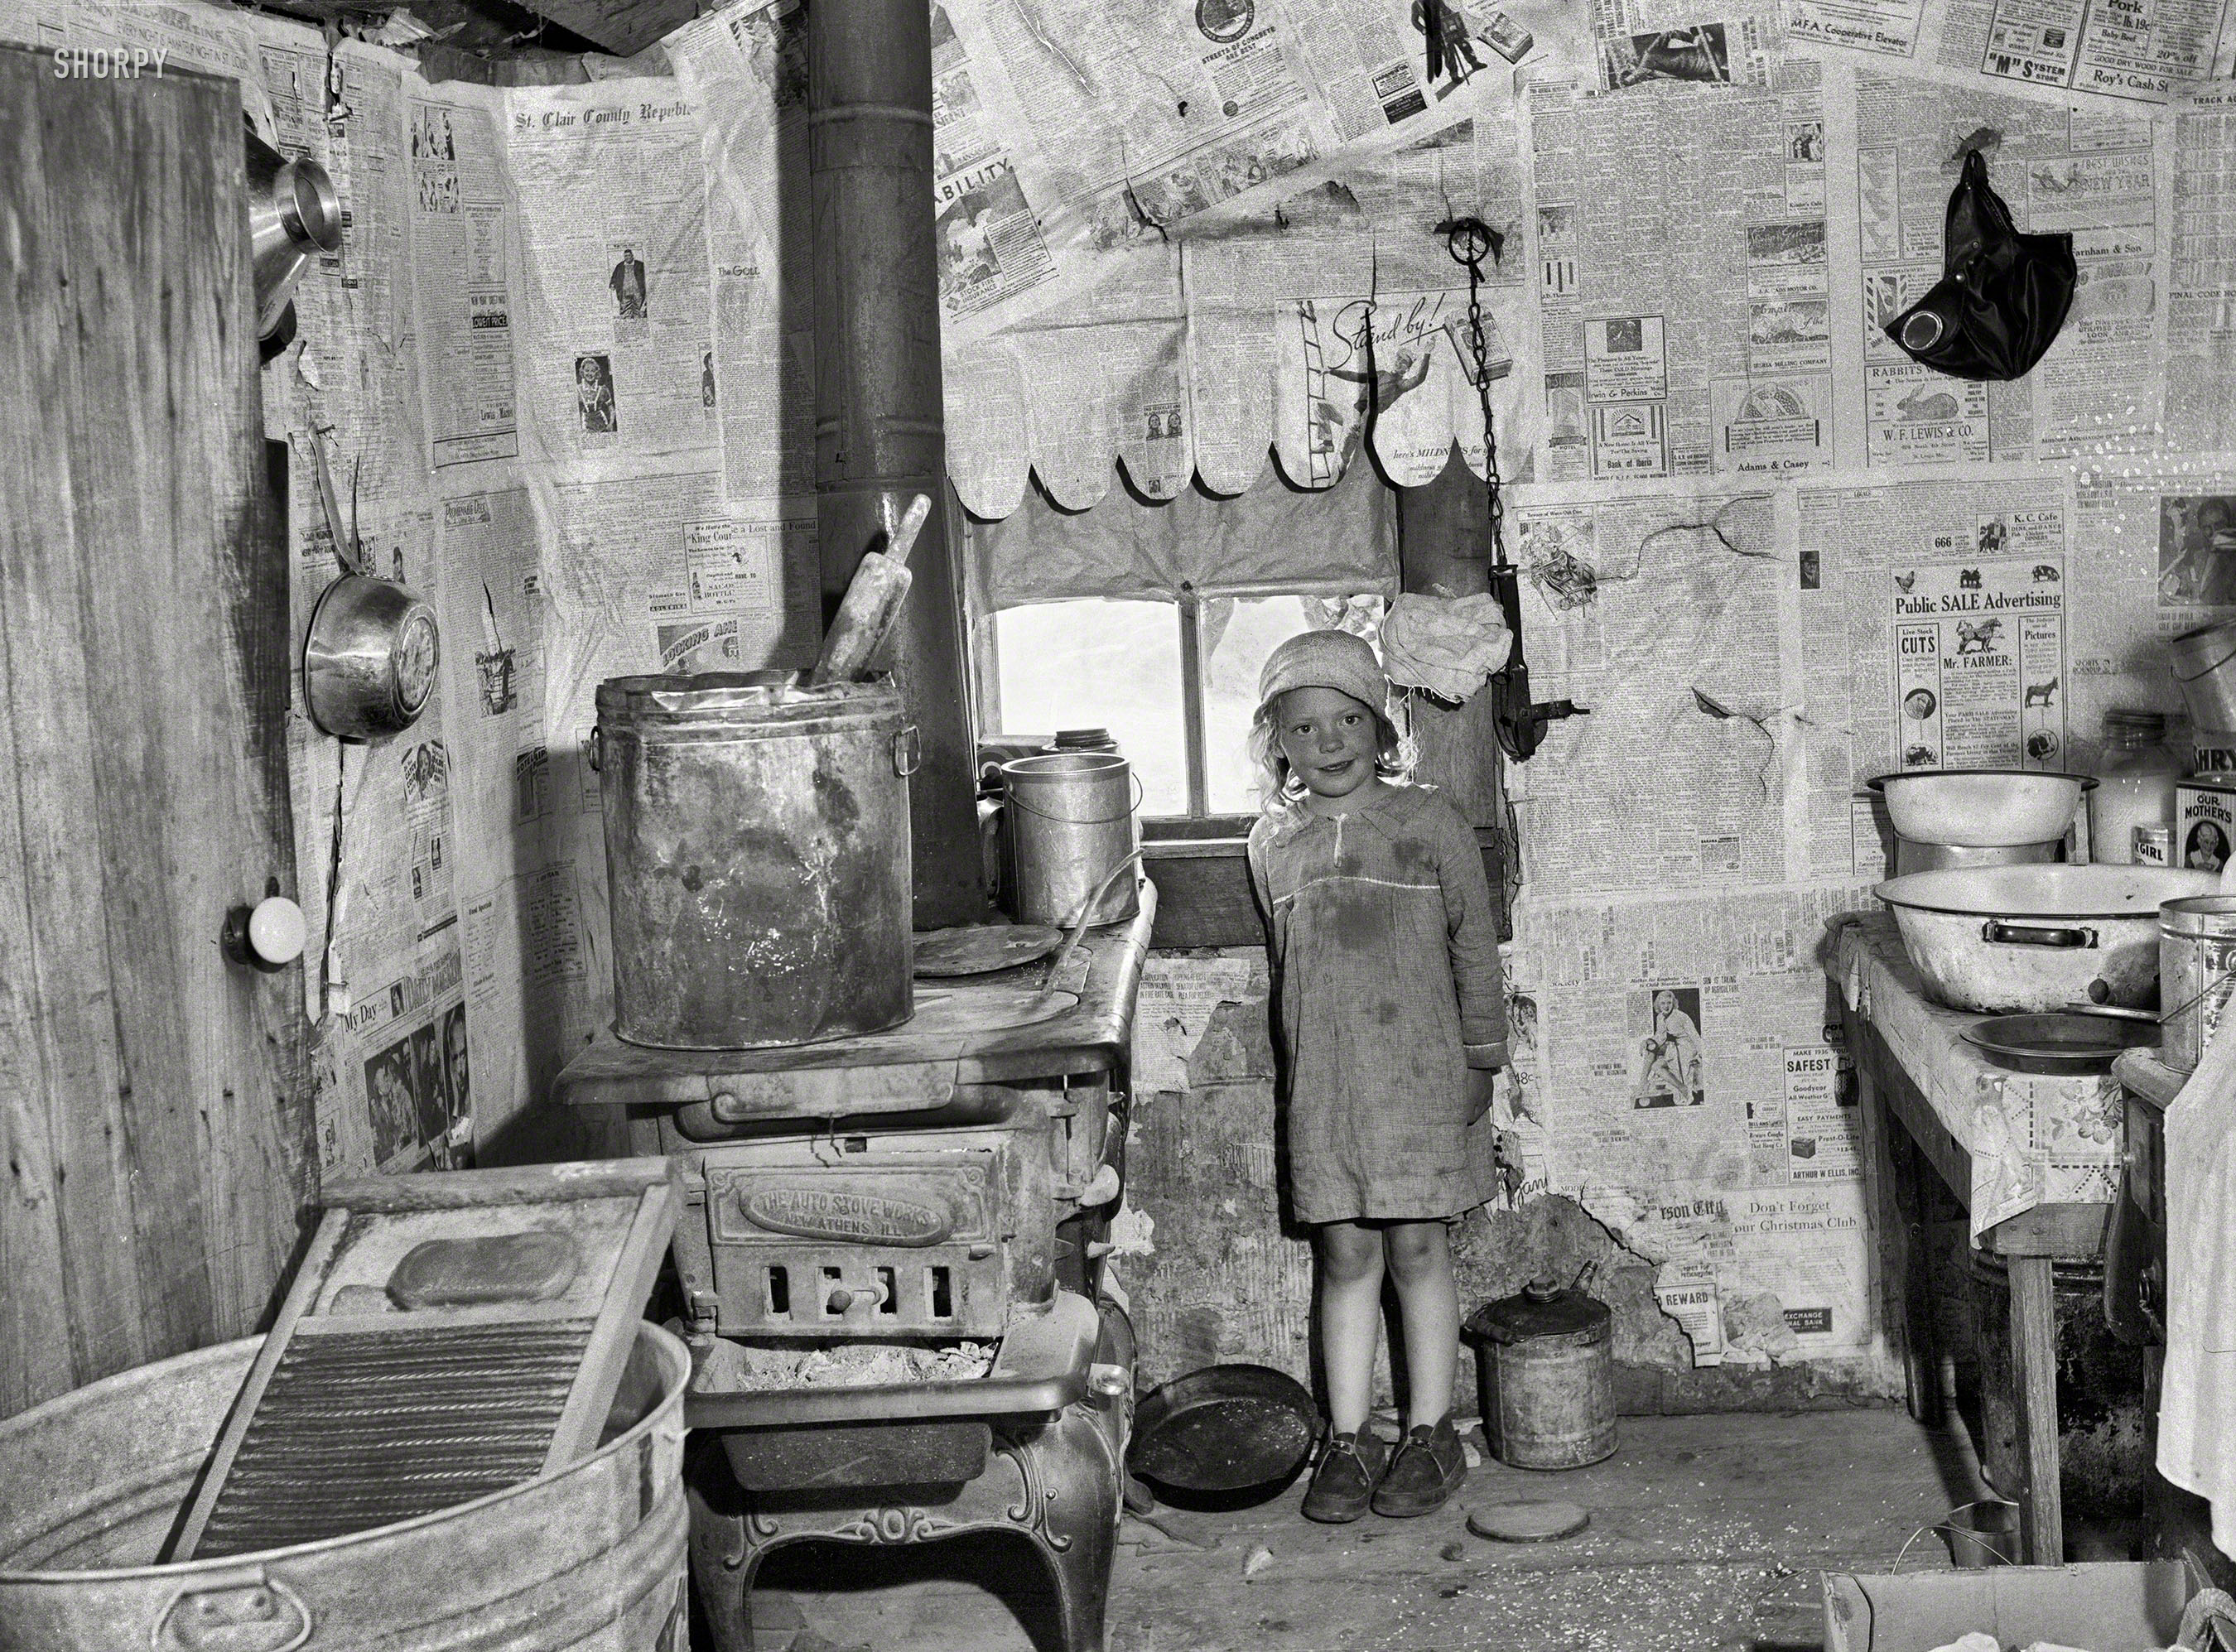 May 1936. "Sharecropper shack. Kitchen of Ozarks cabin purchased for Lake of the Ozarks project. Missouri." Photo by Carl Mydans, Resettlement Administration. View full size.